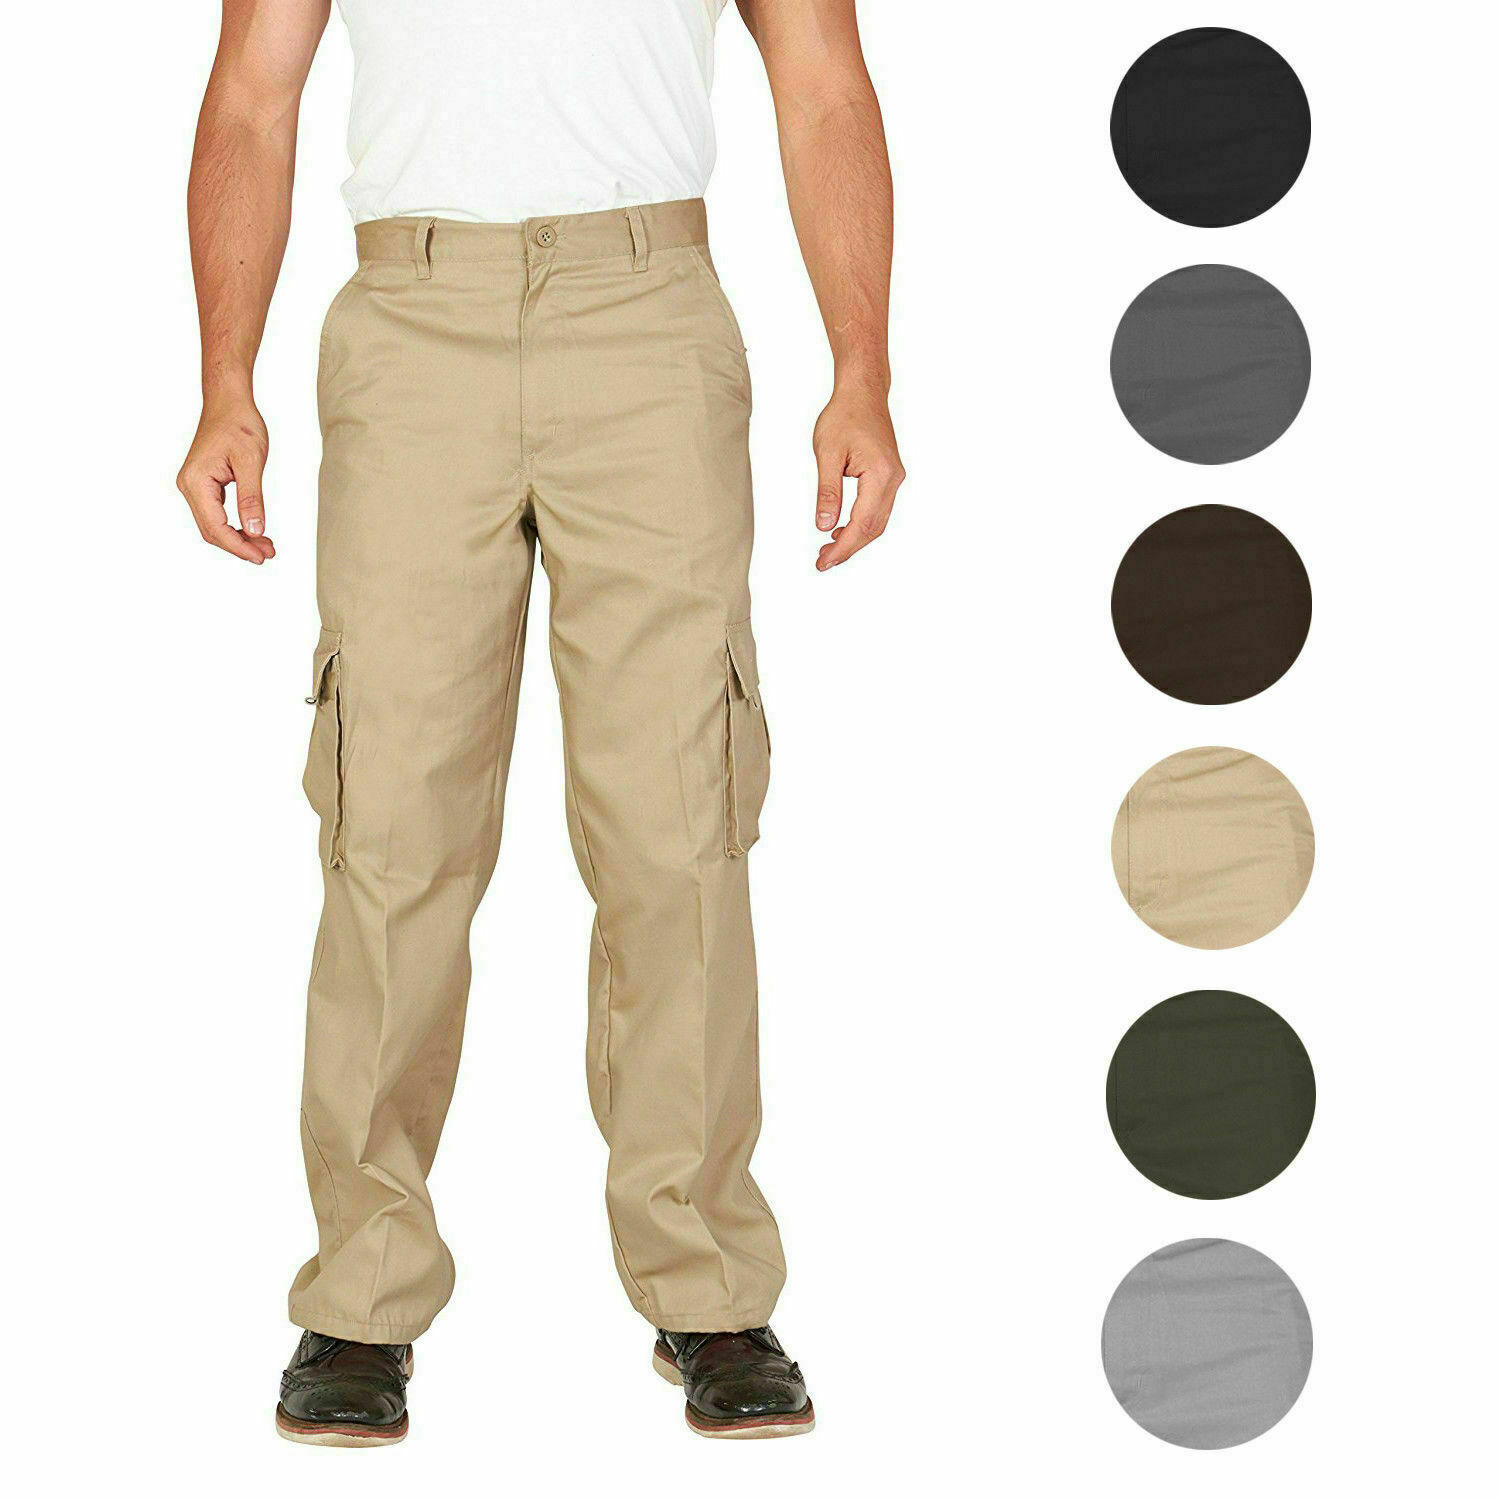 Men's Tactical Combat Military Army Work Twill Cargo Pants Trousers- Pants